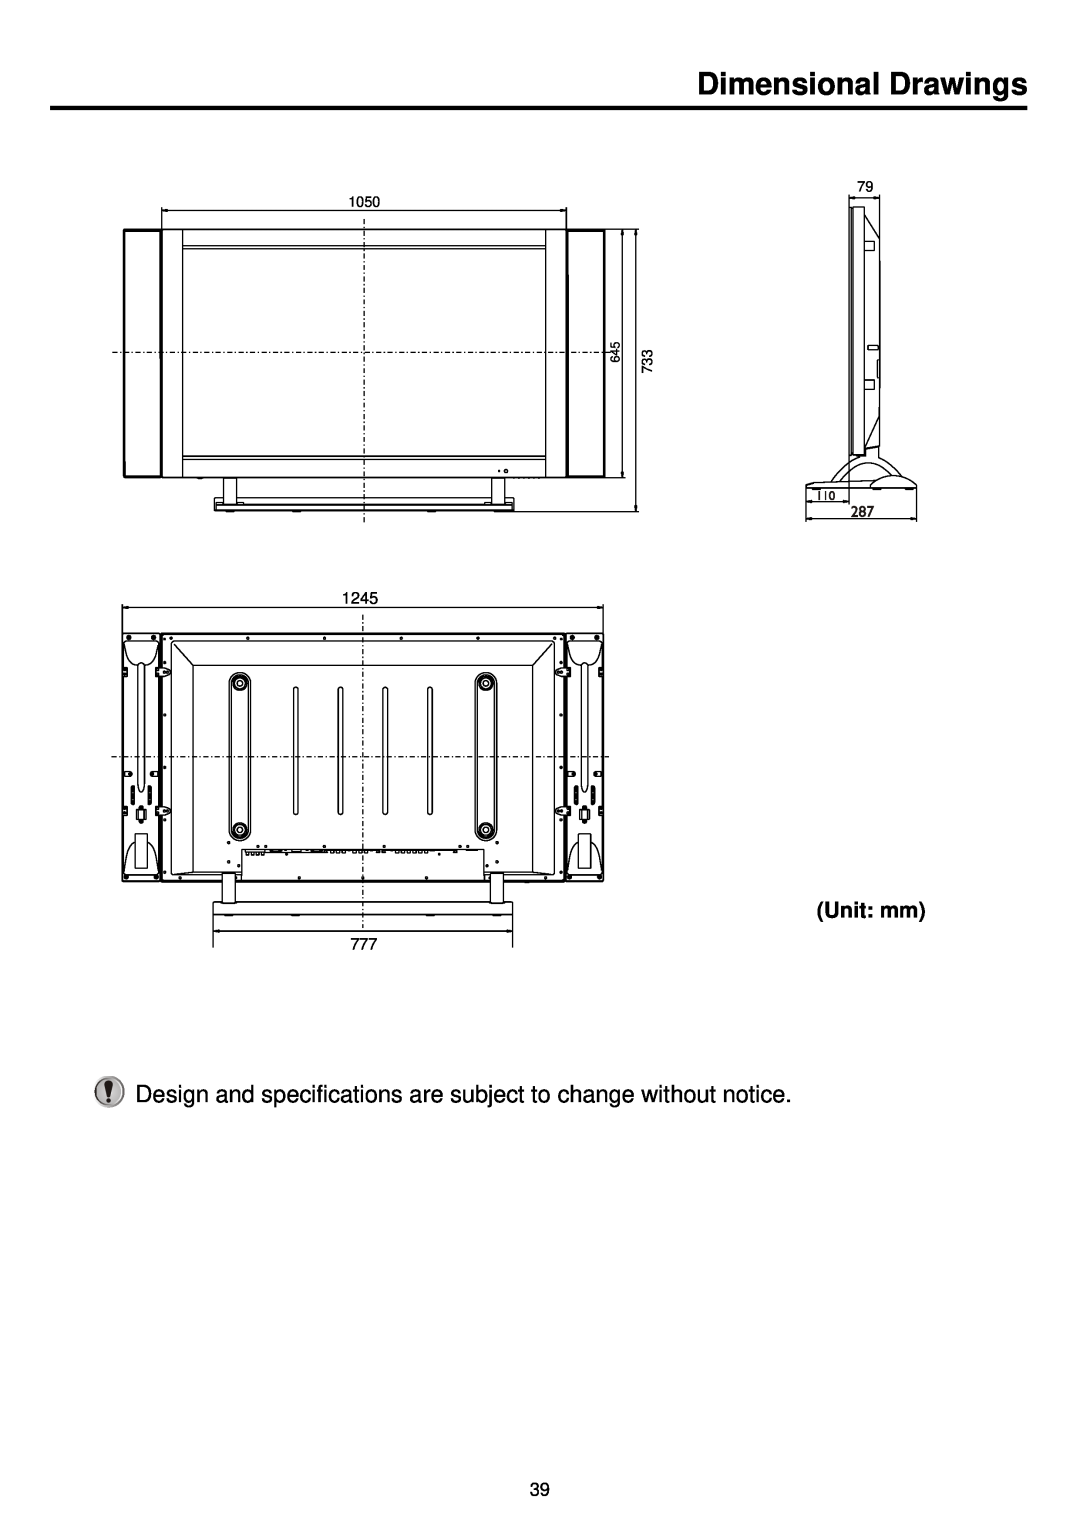 Palsonic PDP4200 Dimensional Drawings, Design and specifications are subject to change without notice, Unit mm, 1050, 1245 